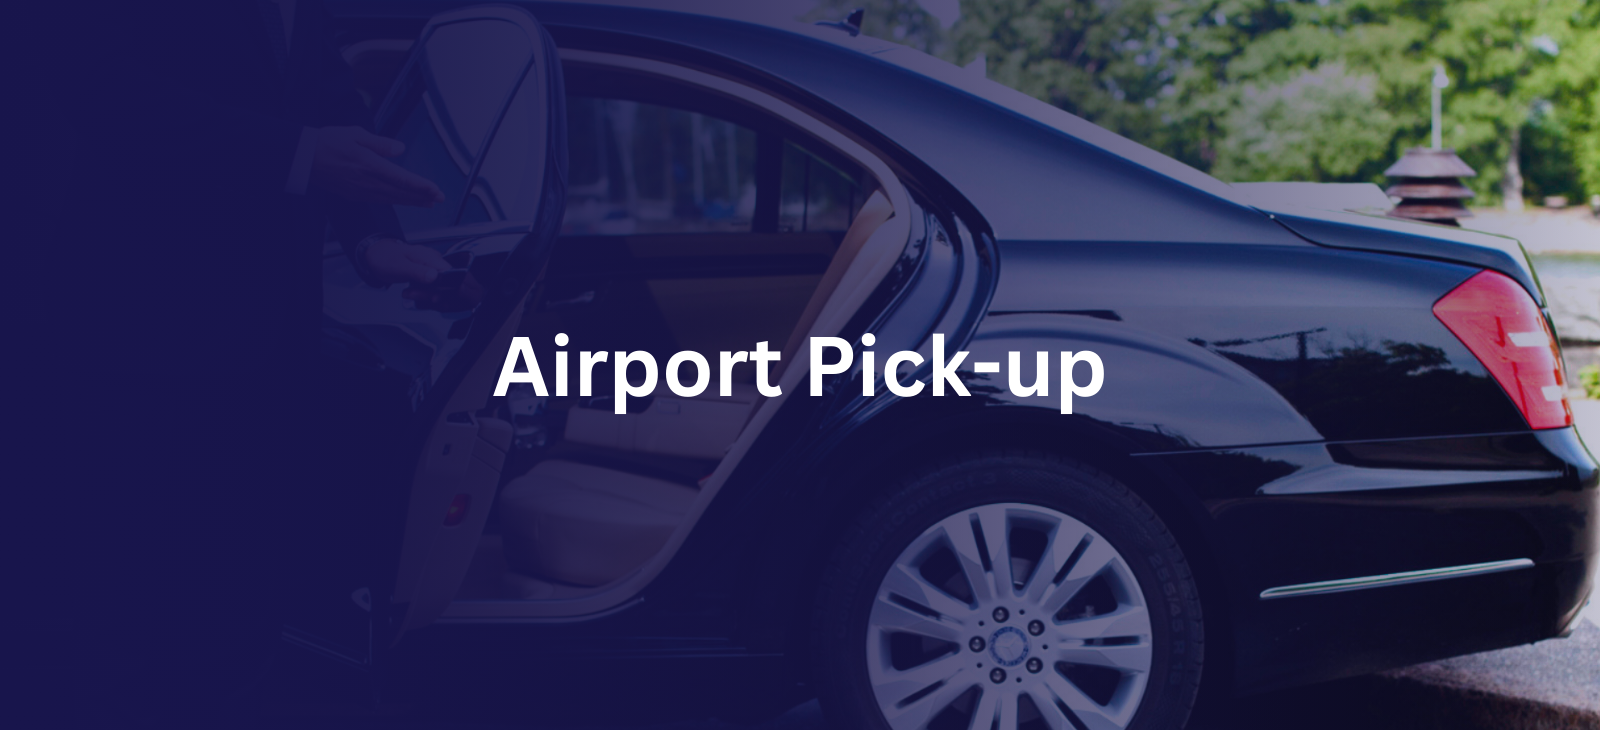 One Hub Study's Airport Pick-up Services